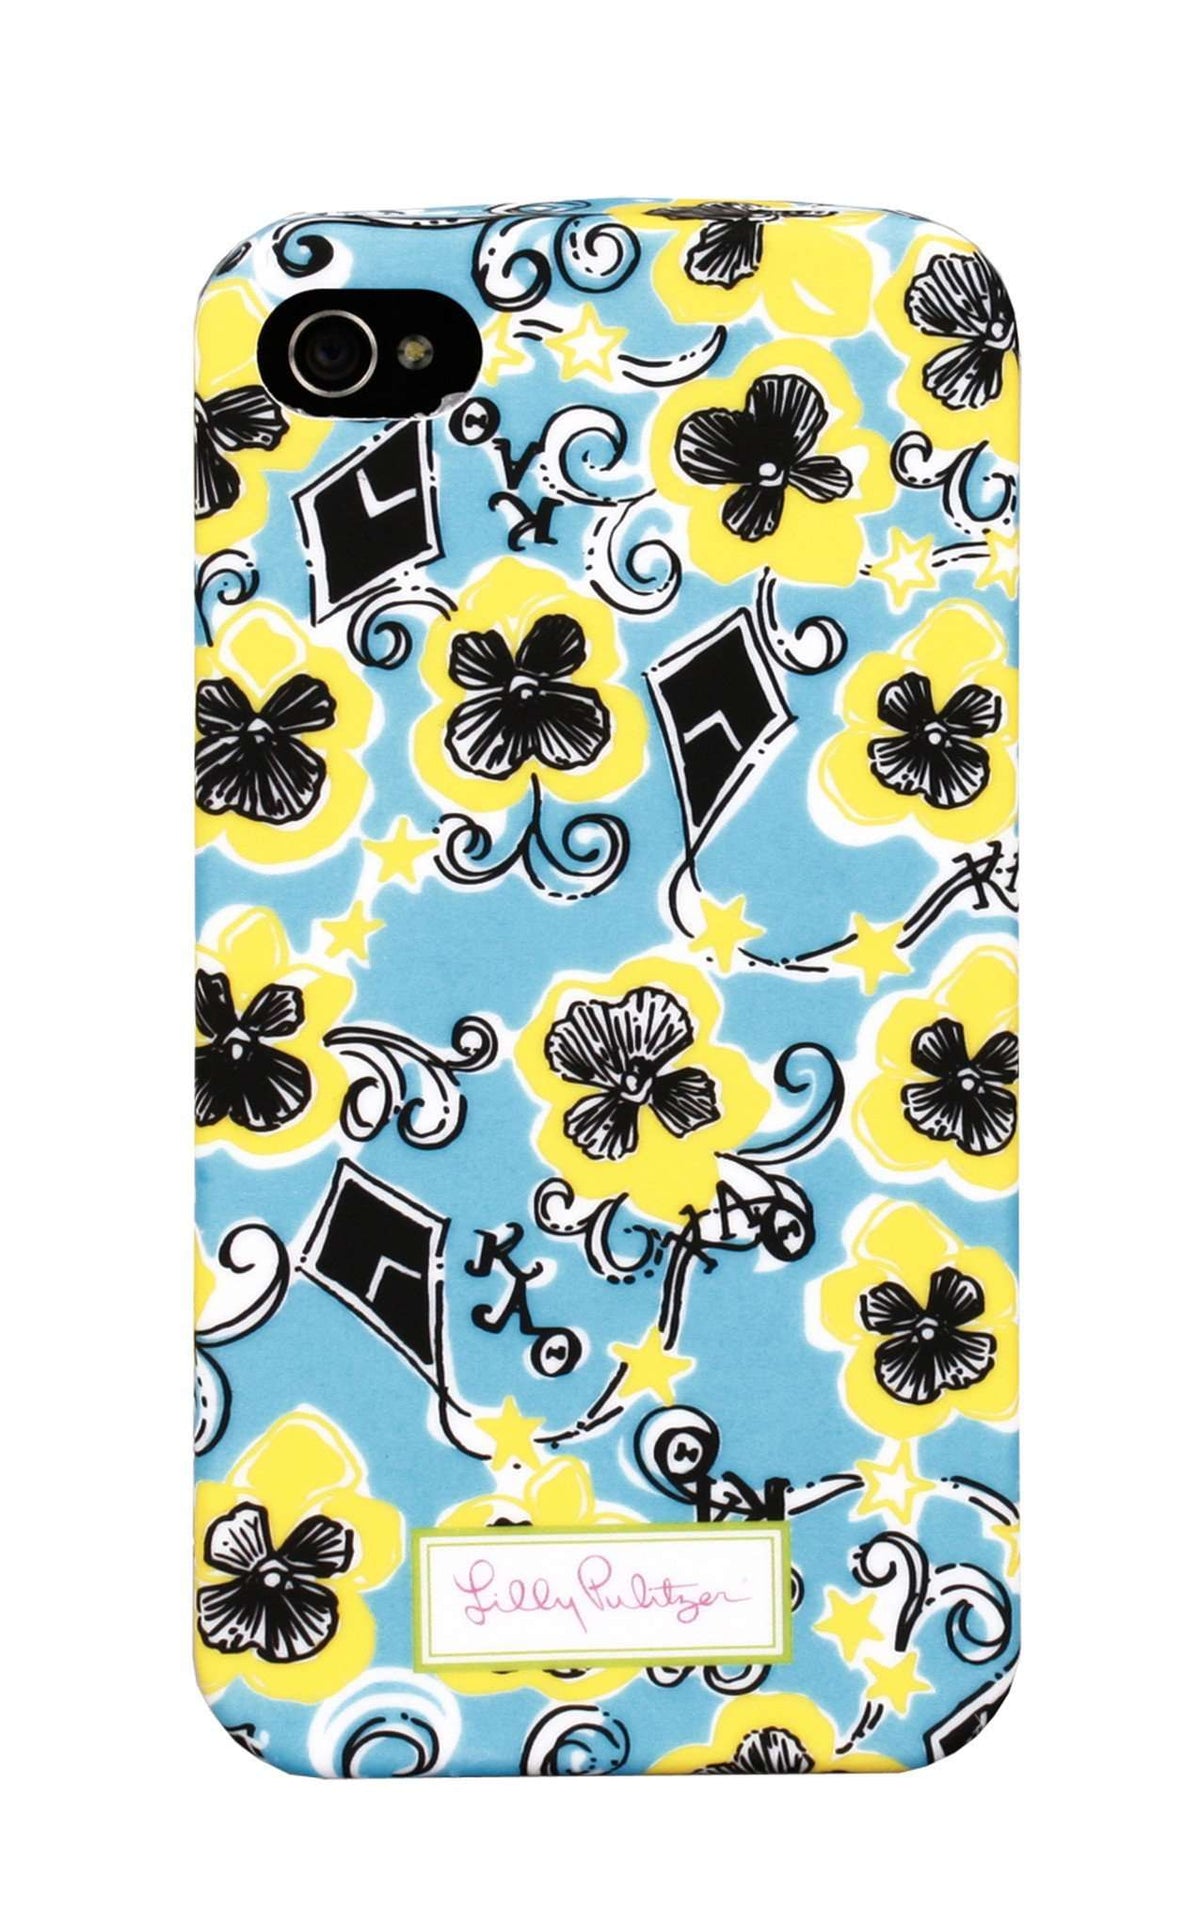 Kappa Alpha Theta iPhone 4/4s Cover by Lilly Pulitzer - Country Club Prep